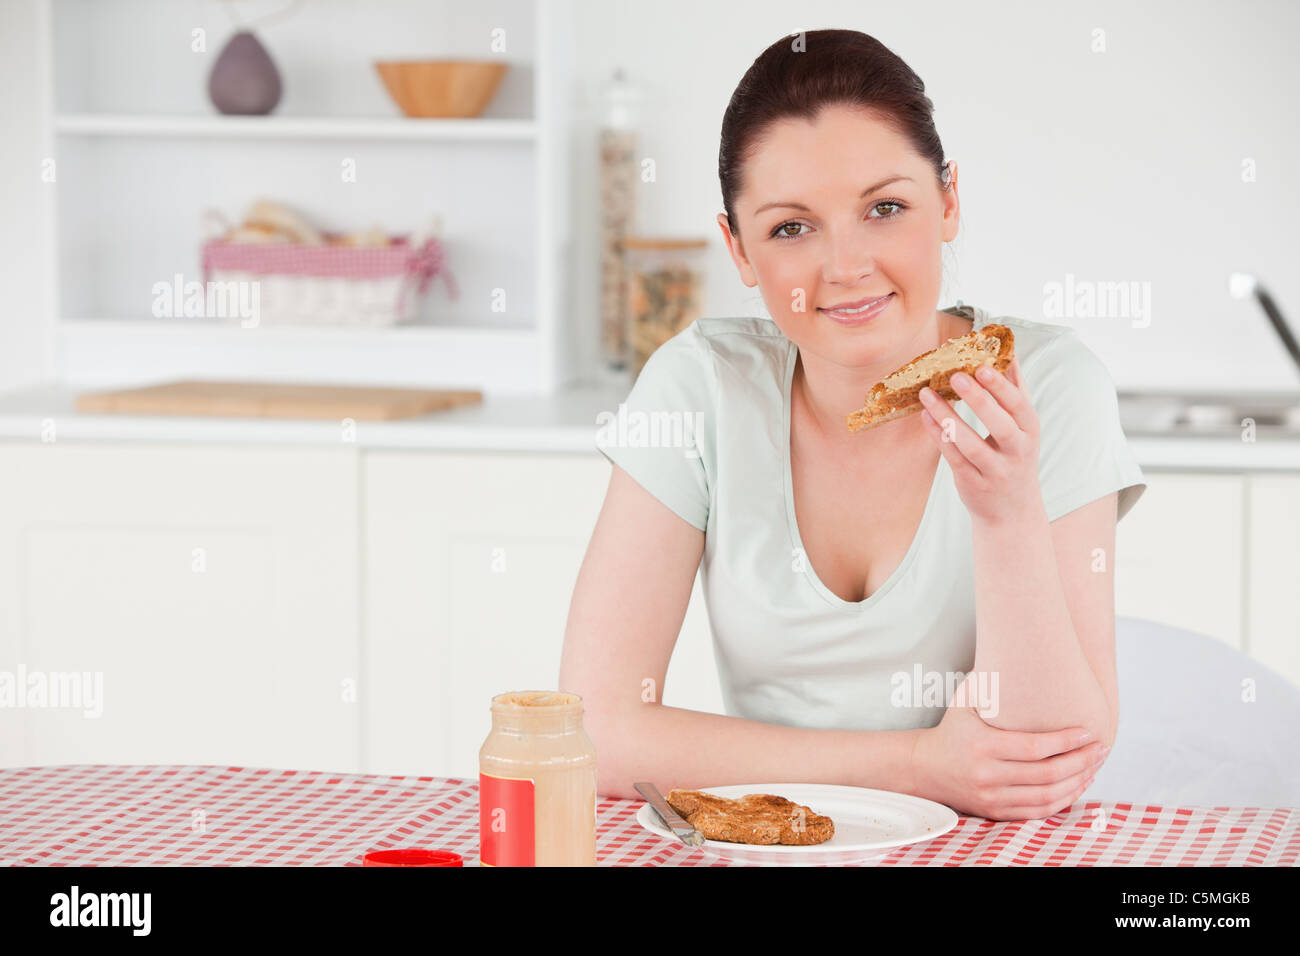 Beautiful woman posing while eating a slice of bread Stock Photo